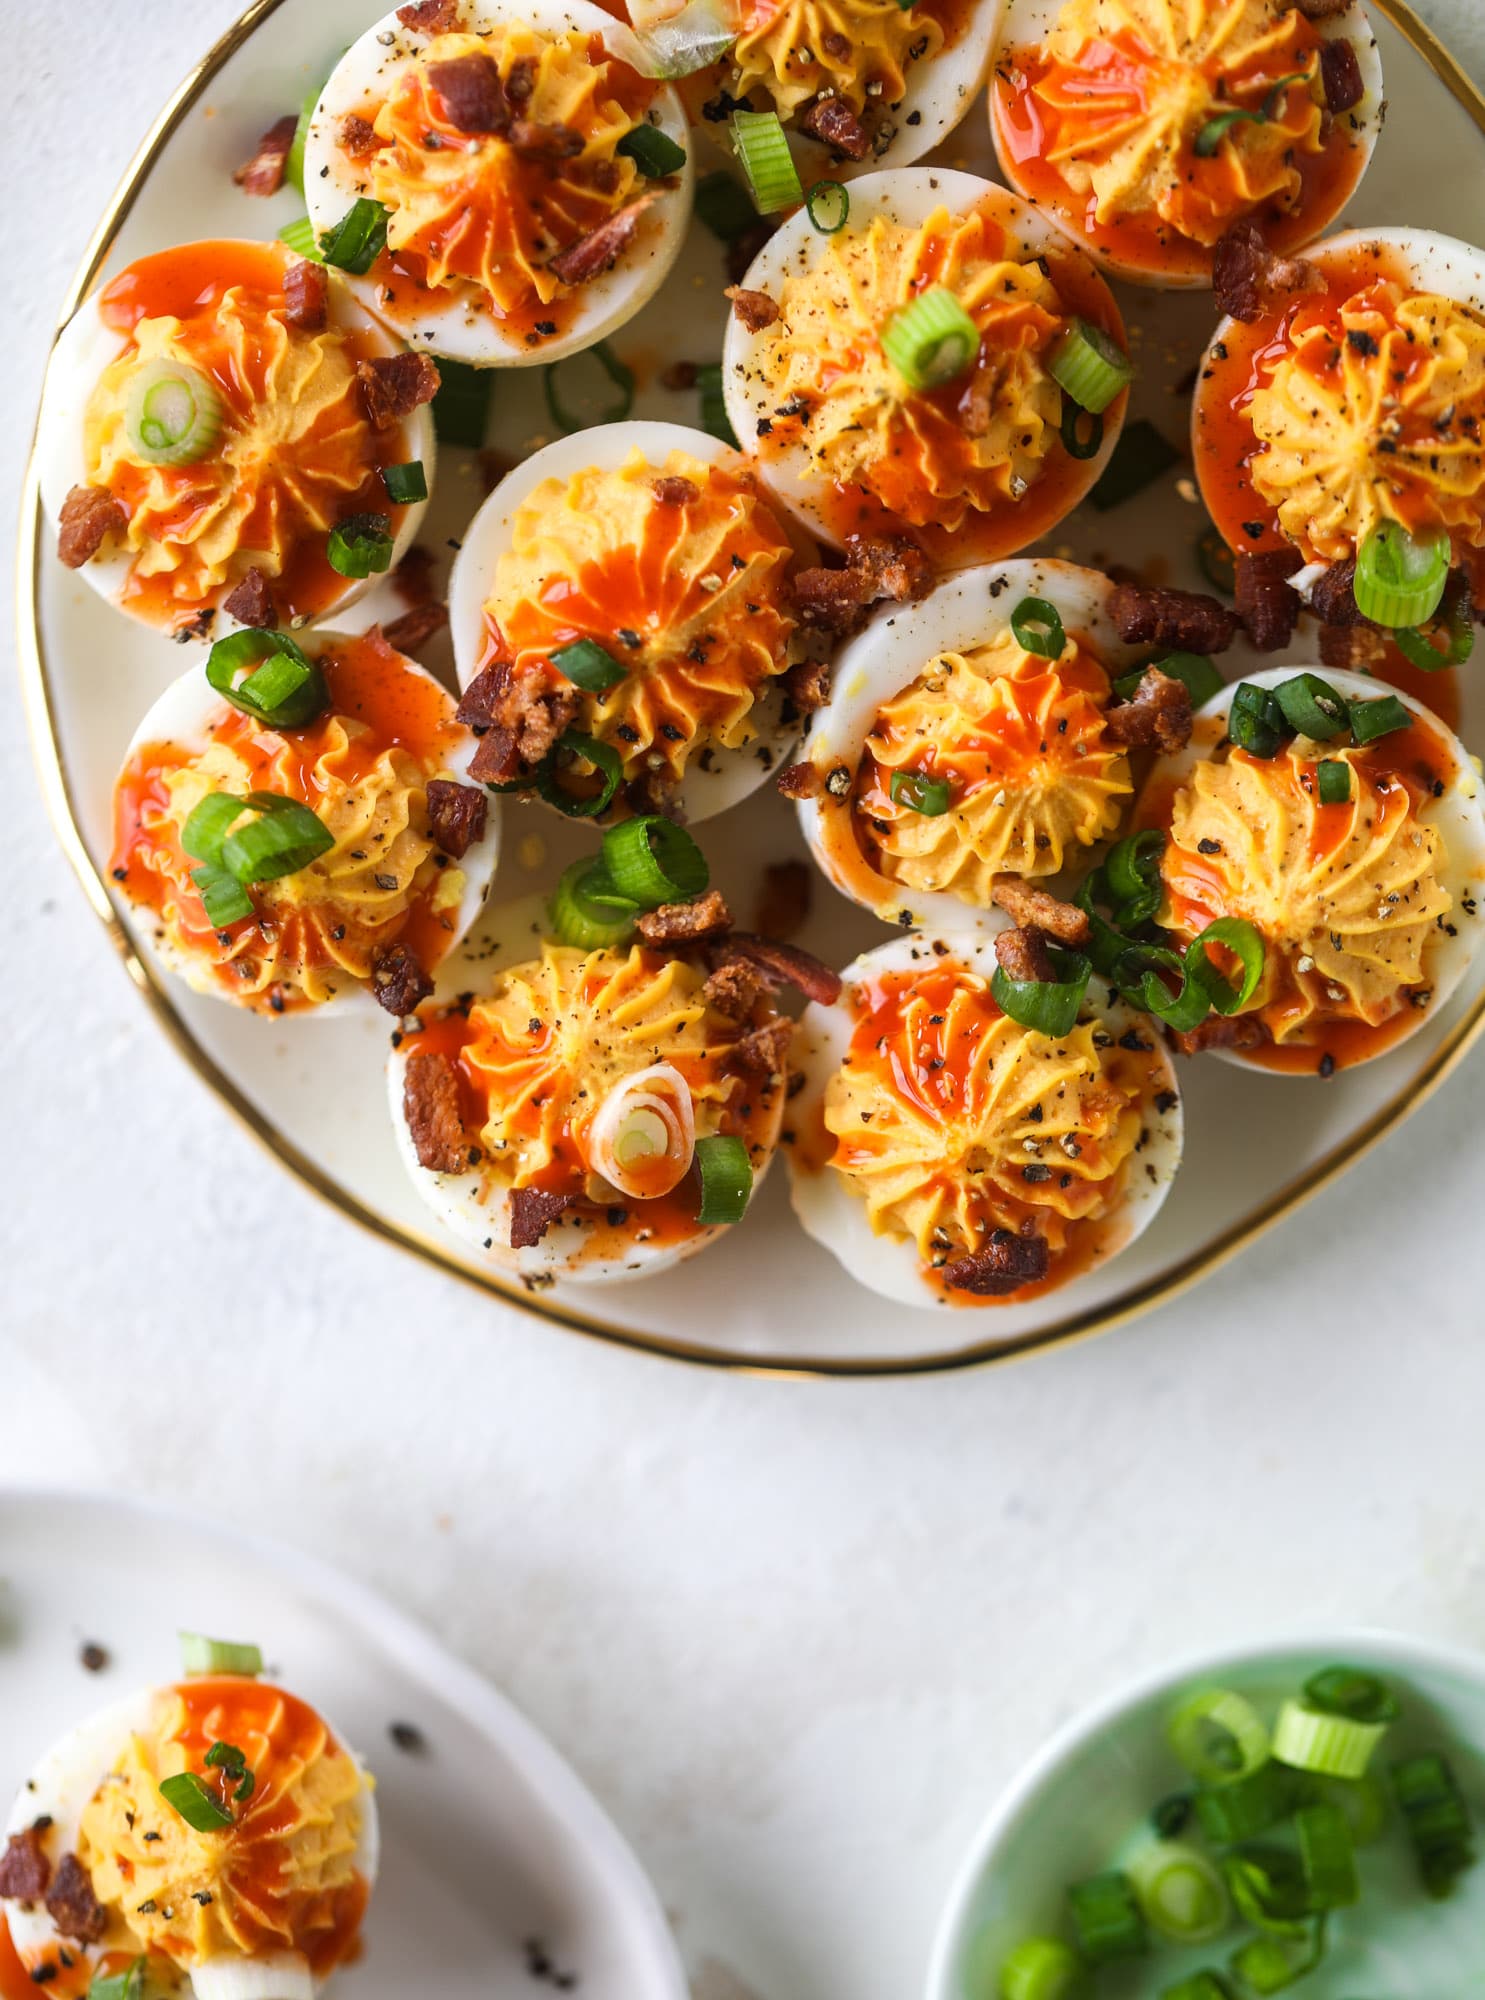 Buffalo deviled eggs are kicked-up deviled eggs! Made with goat cheese filling and served with buffalo wing sauce, crispy bacon and sliced scallions. I howsweeteats.com #deviledeggs #buffalo